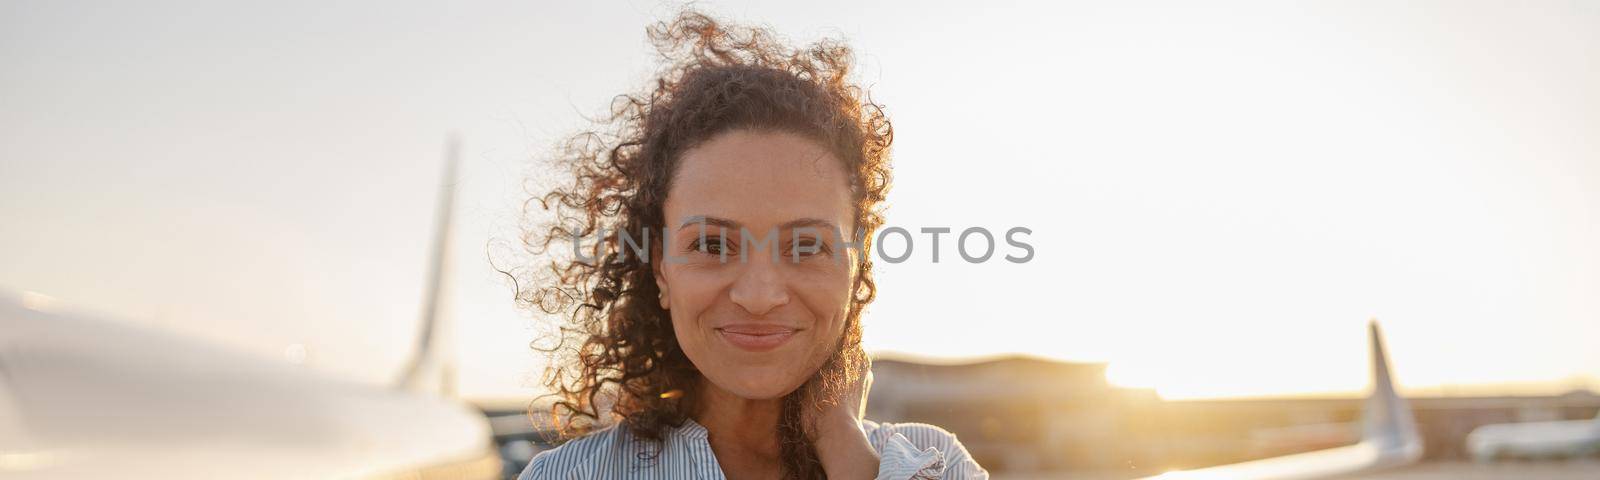 Portrait of relaxed woman smiling at camera while standing outdoors ready for boarding the plane at sunset. Vacation, lifestyle, traveling concept